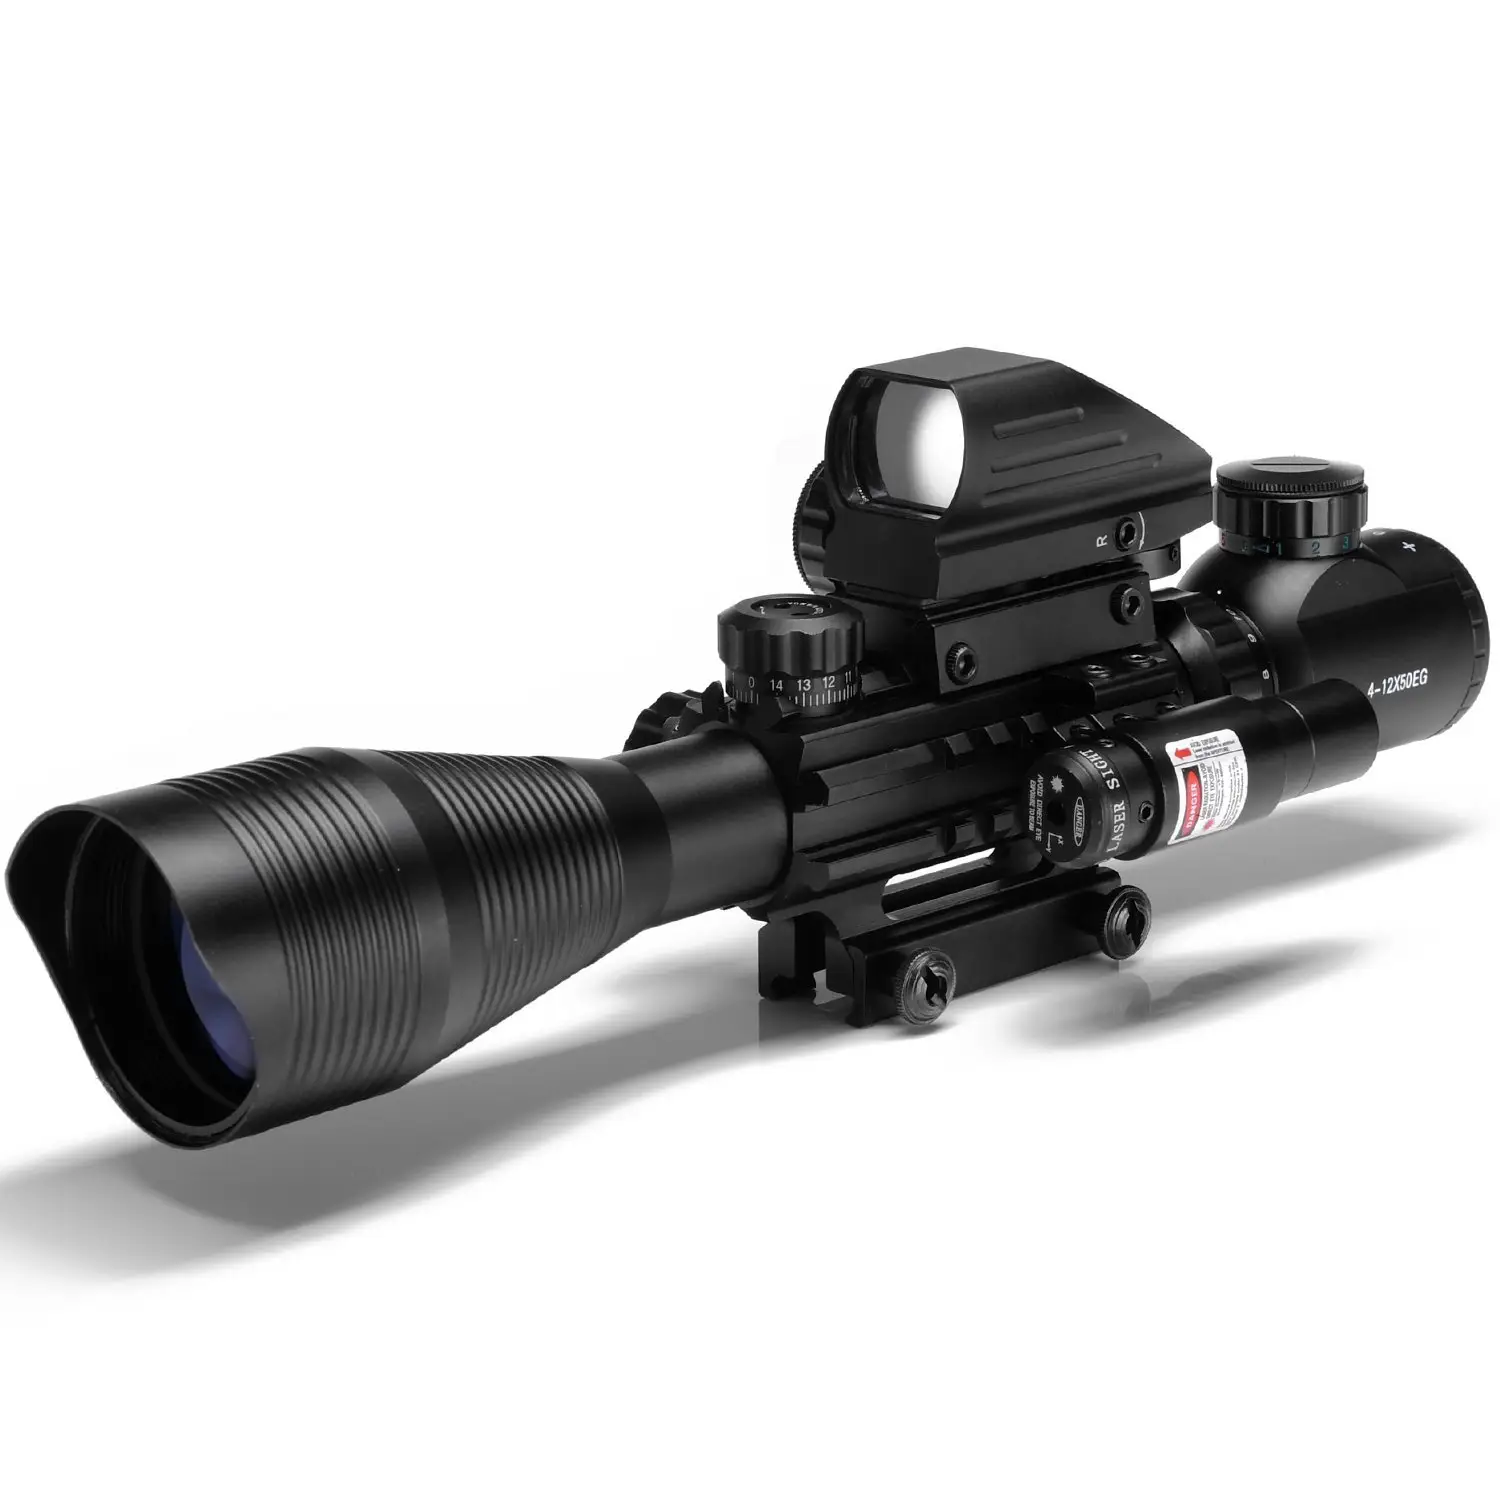 Spike Scope C4-16x50EG Dual beleuchtet mit Tactical 4 Reticle Red Dot Visier und Red Sight, 3 in 1 Combo Scope